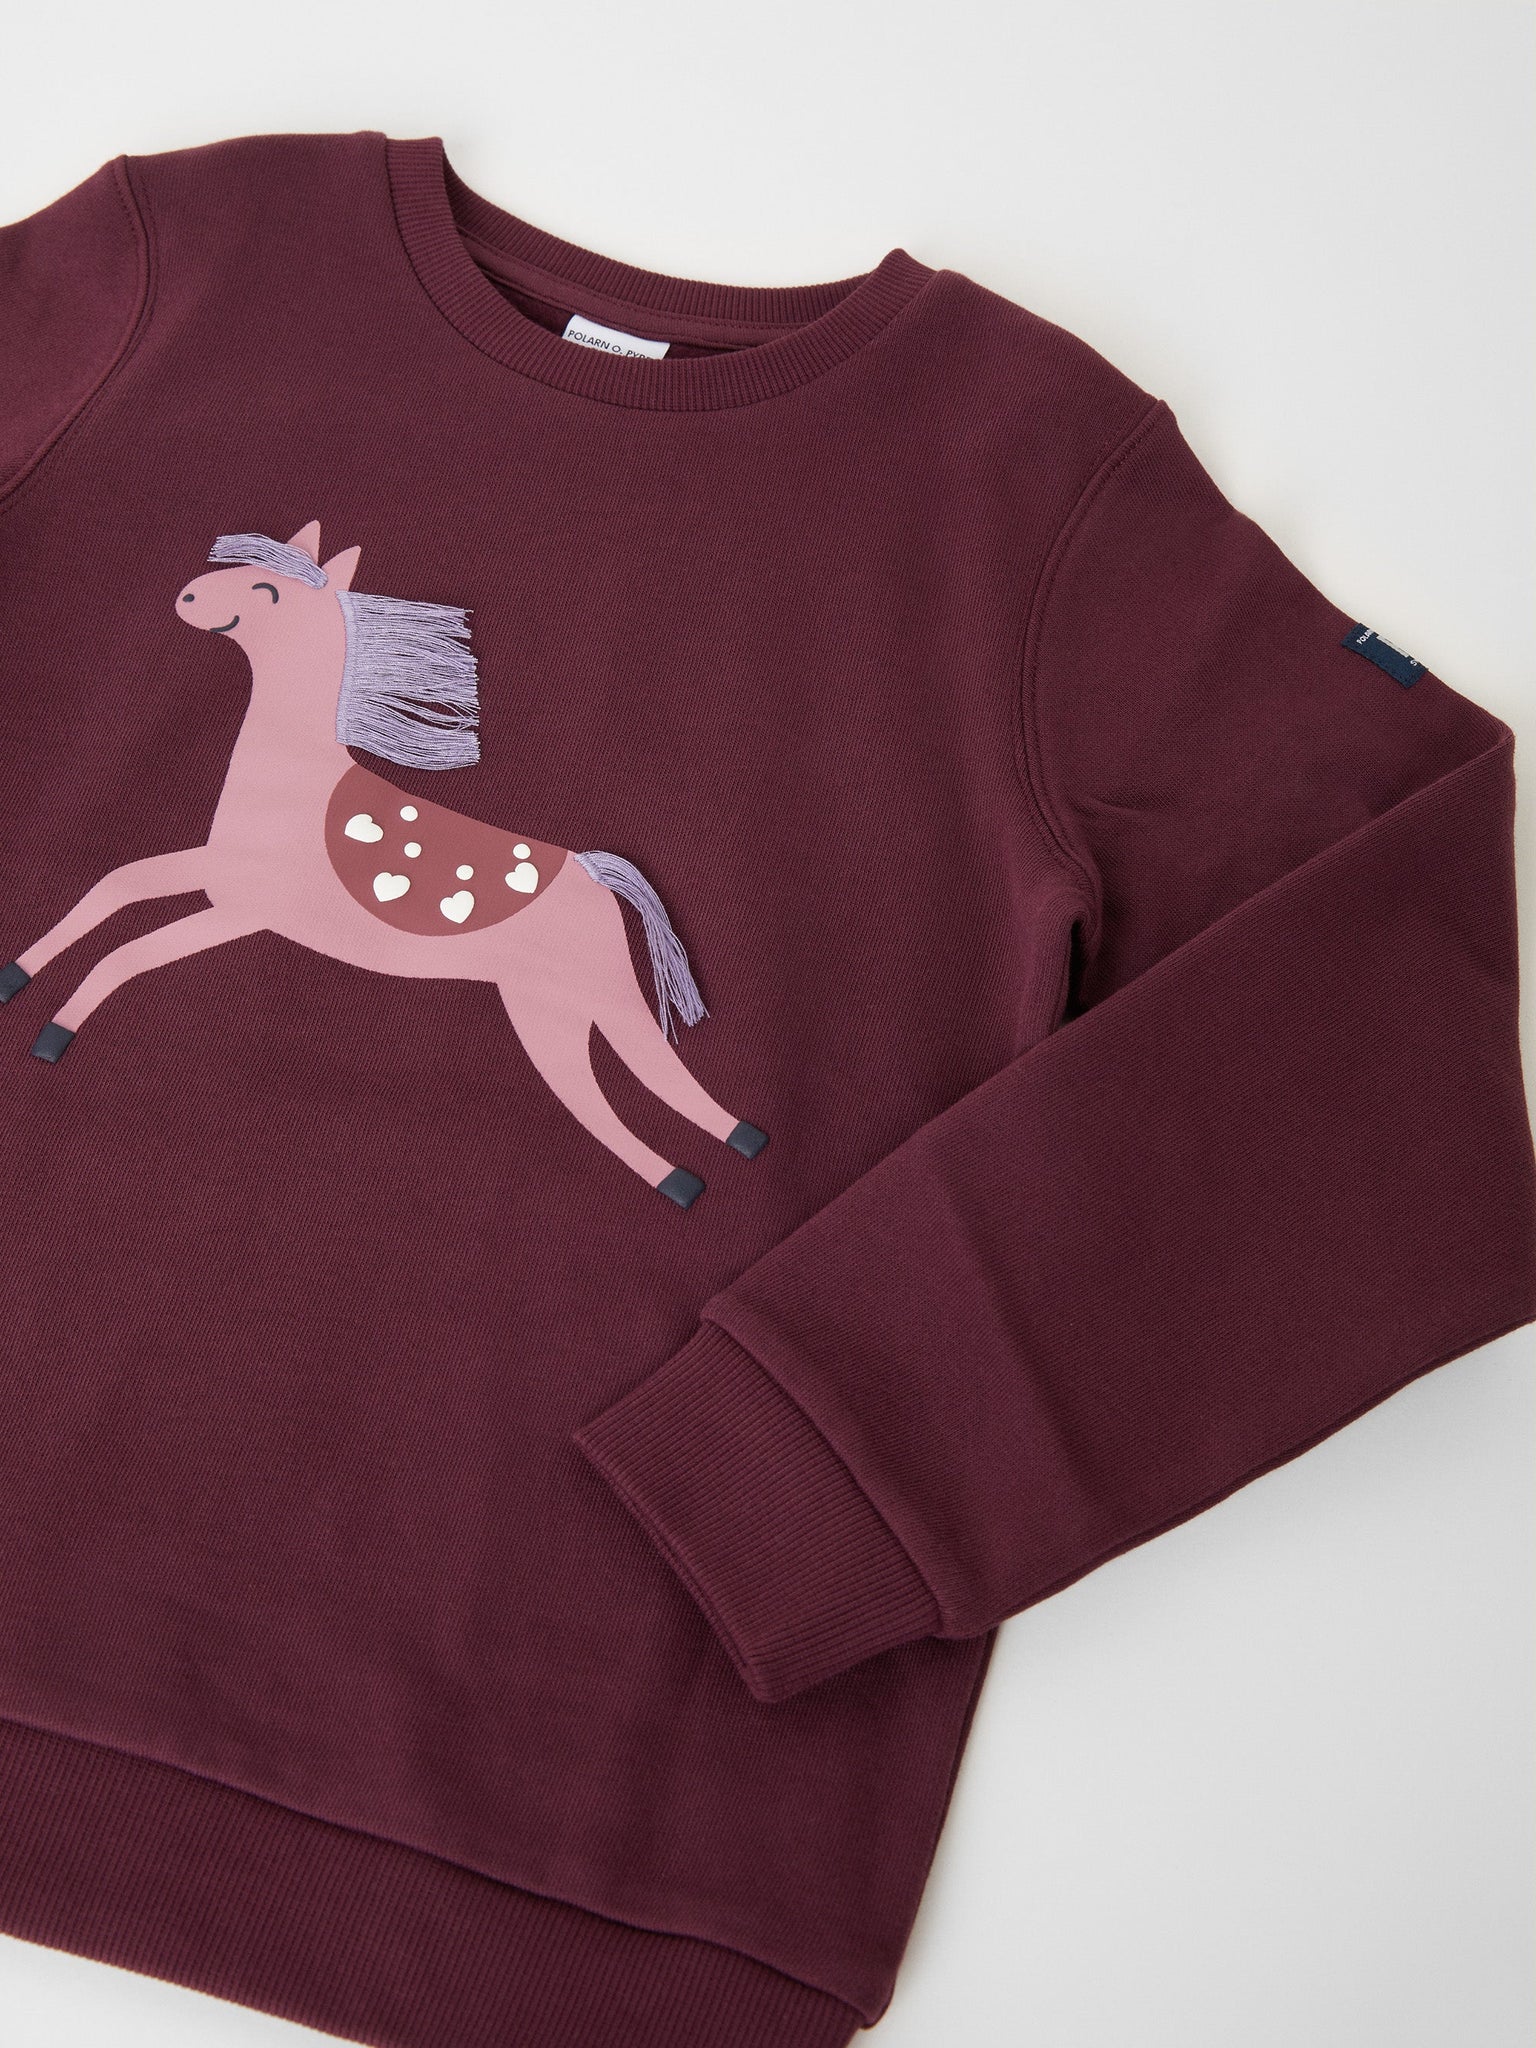 Horse Print Kids Cotton Sweatshirt from the Polarn O. Pyret kids collection. Nordic kids clothes made from sustainable sources.